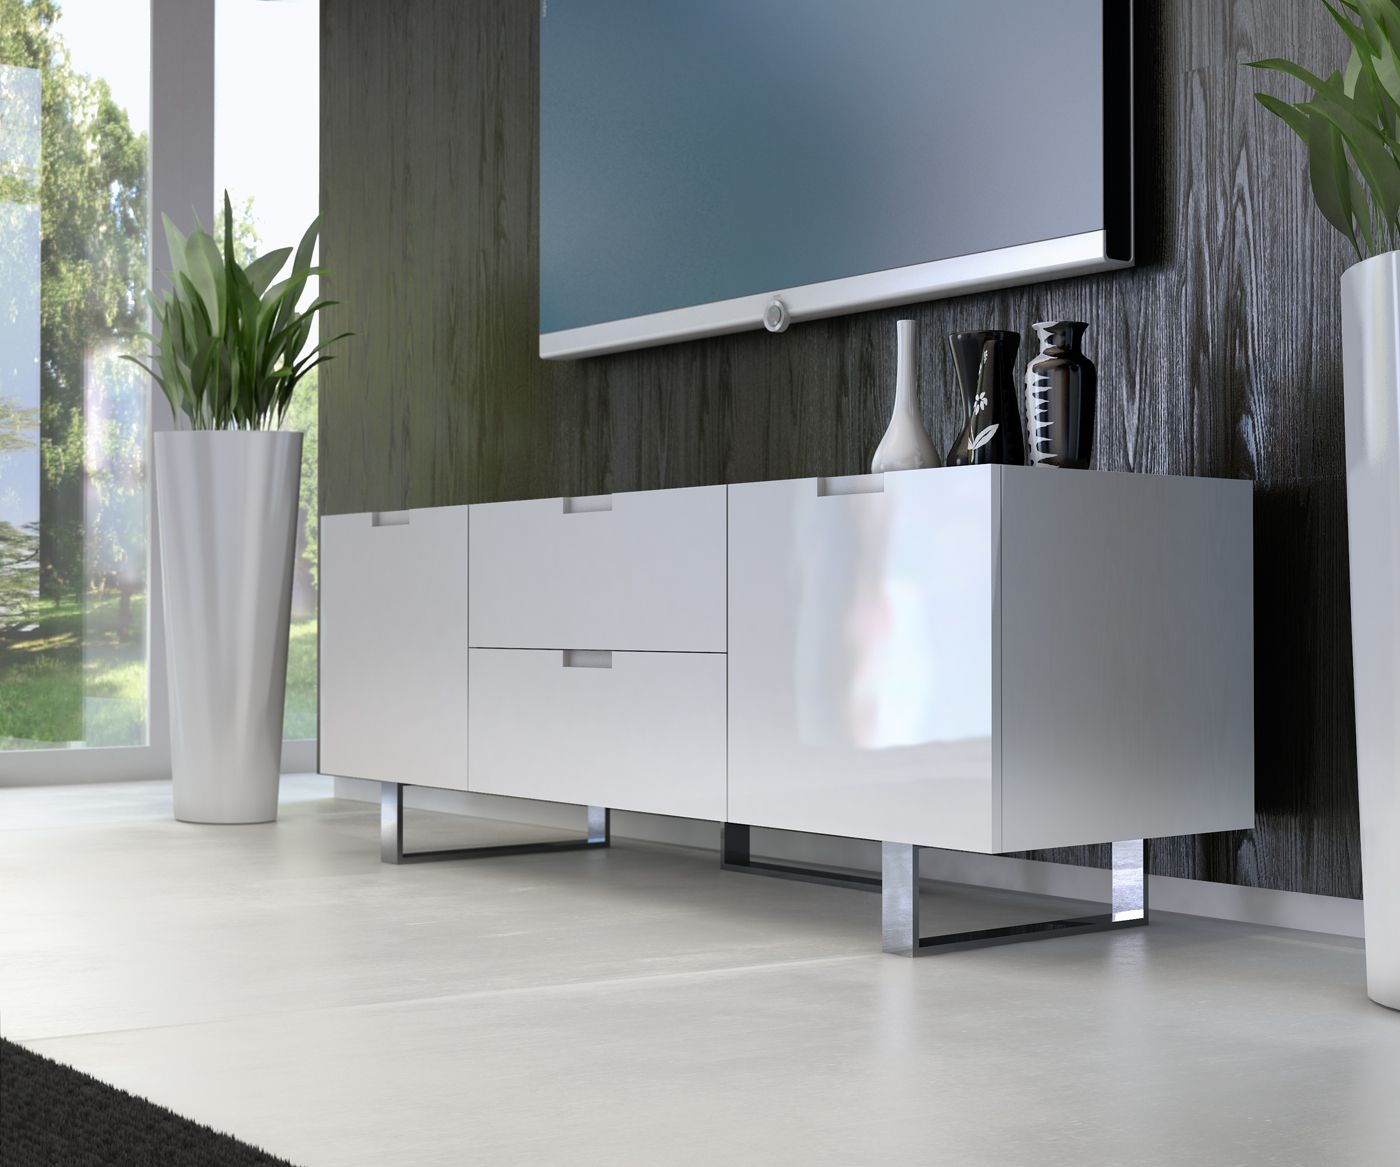 Most Recent Contemporary Tv Stand In Wenge Walnut Or White Lacquer Regarding Contemporary Tv Stands (View 5 of 20)